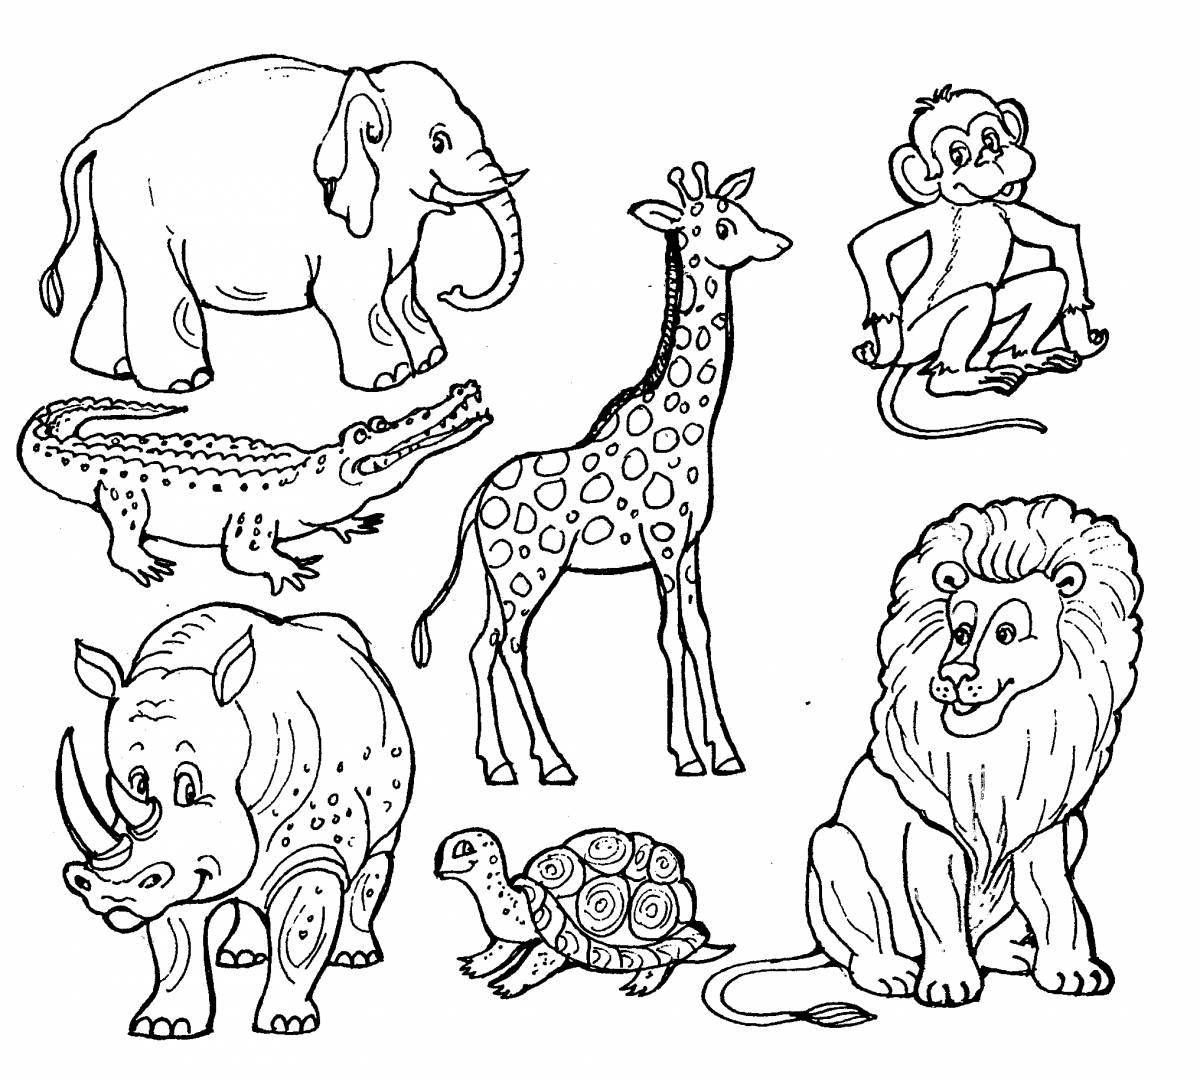 African animals creative coloring book for 3-4 year olds